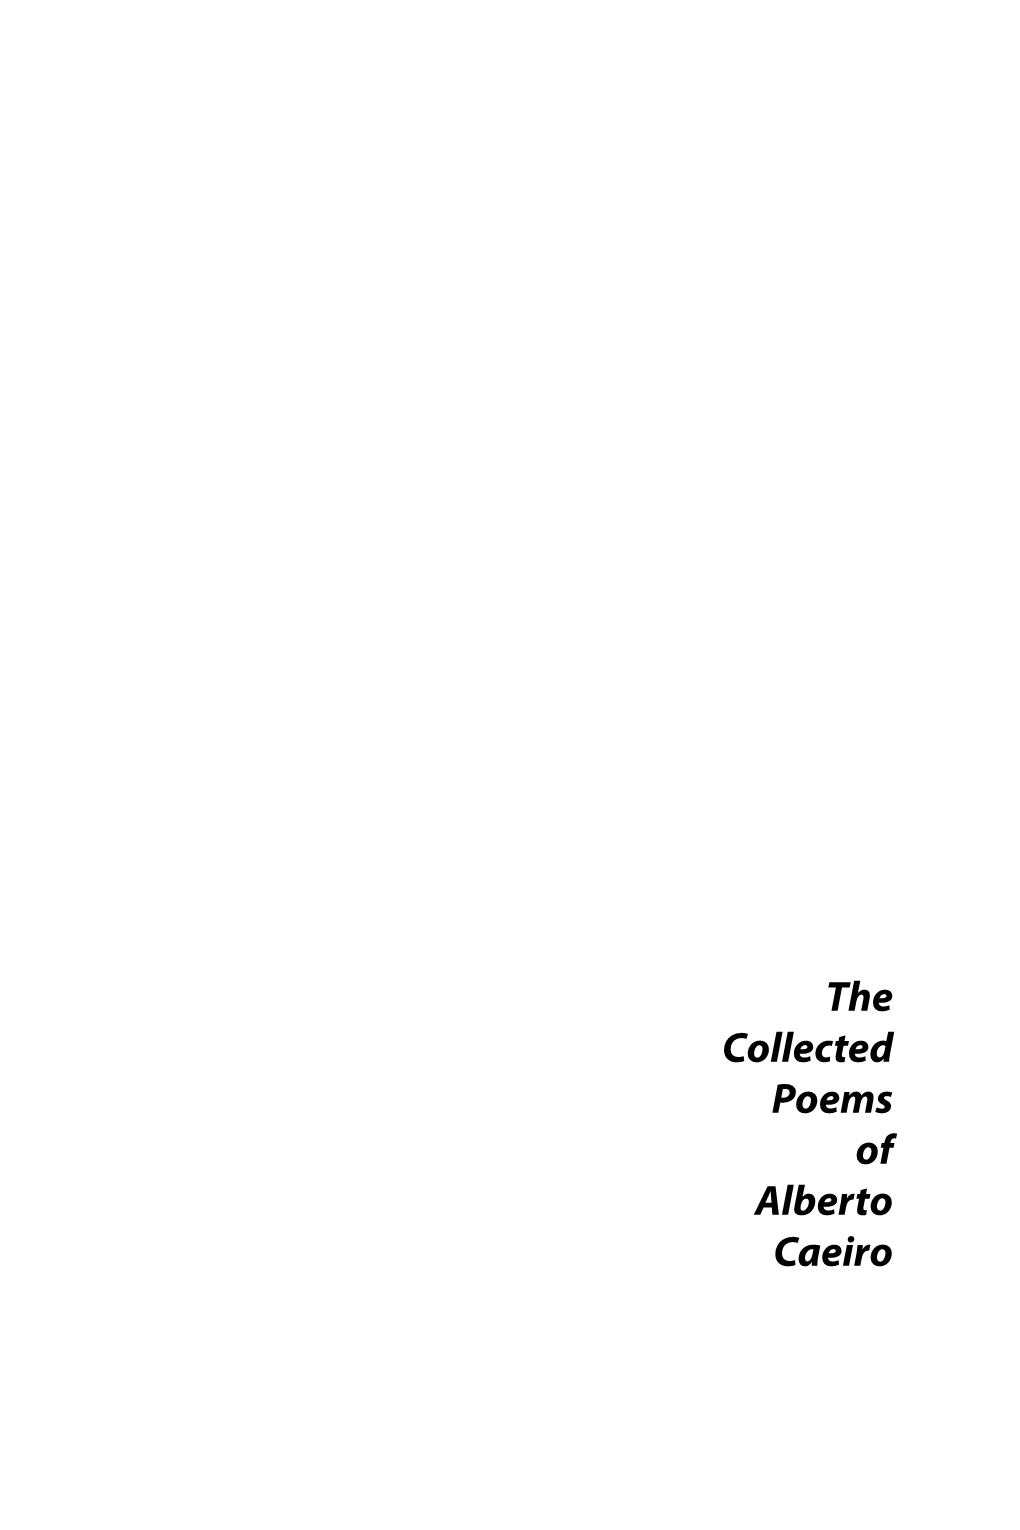 The Collected Poems of Alberto Caeiro the Pessoa Series from Shearsman Books